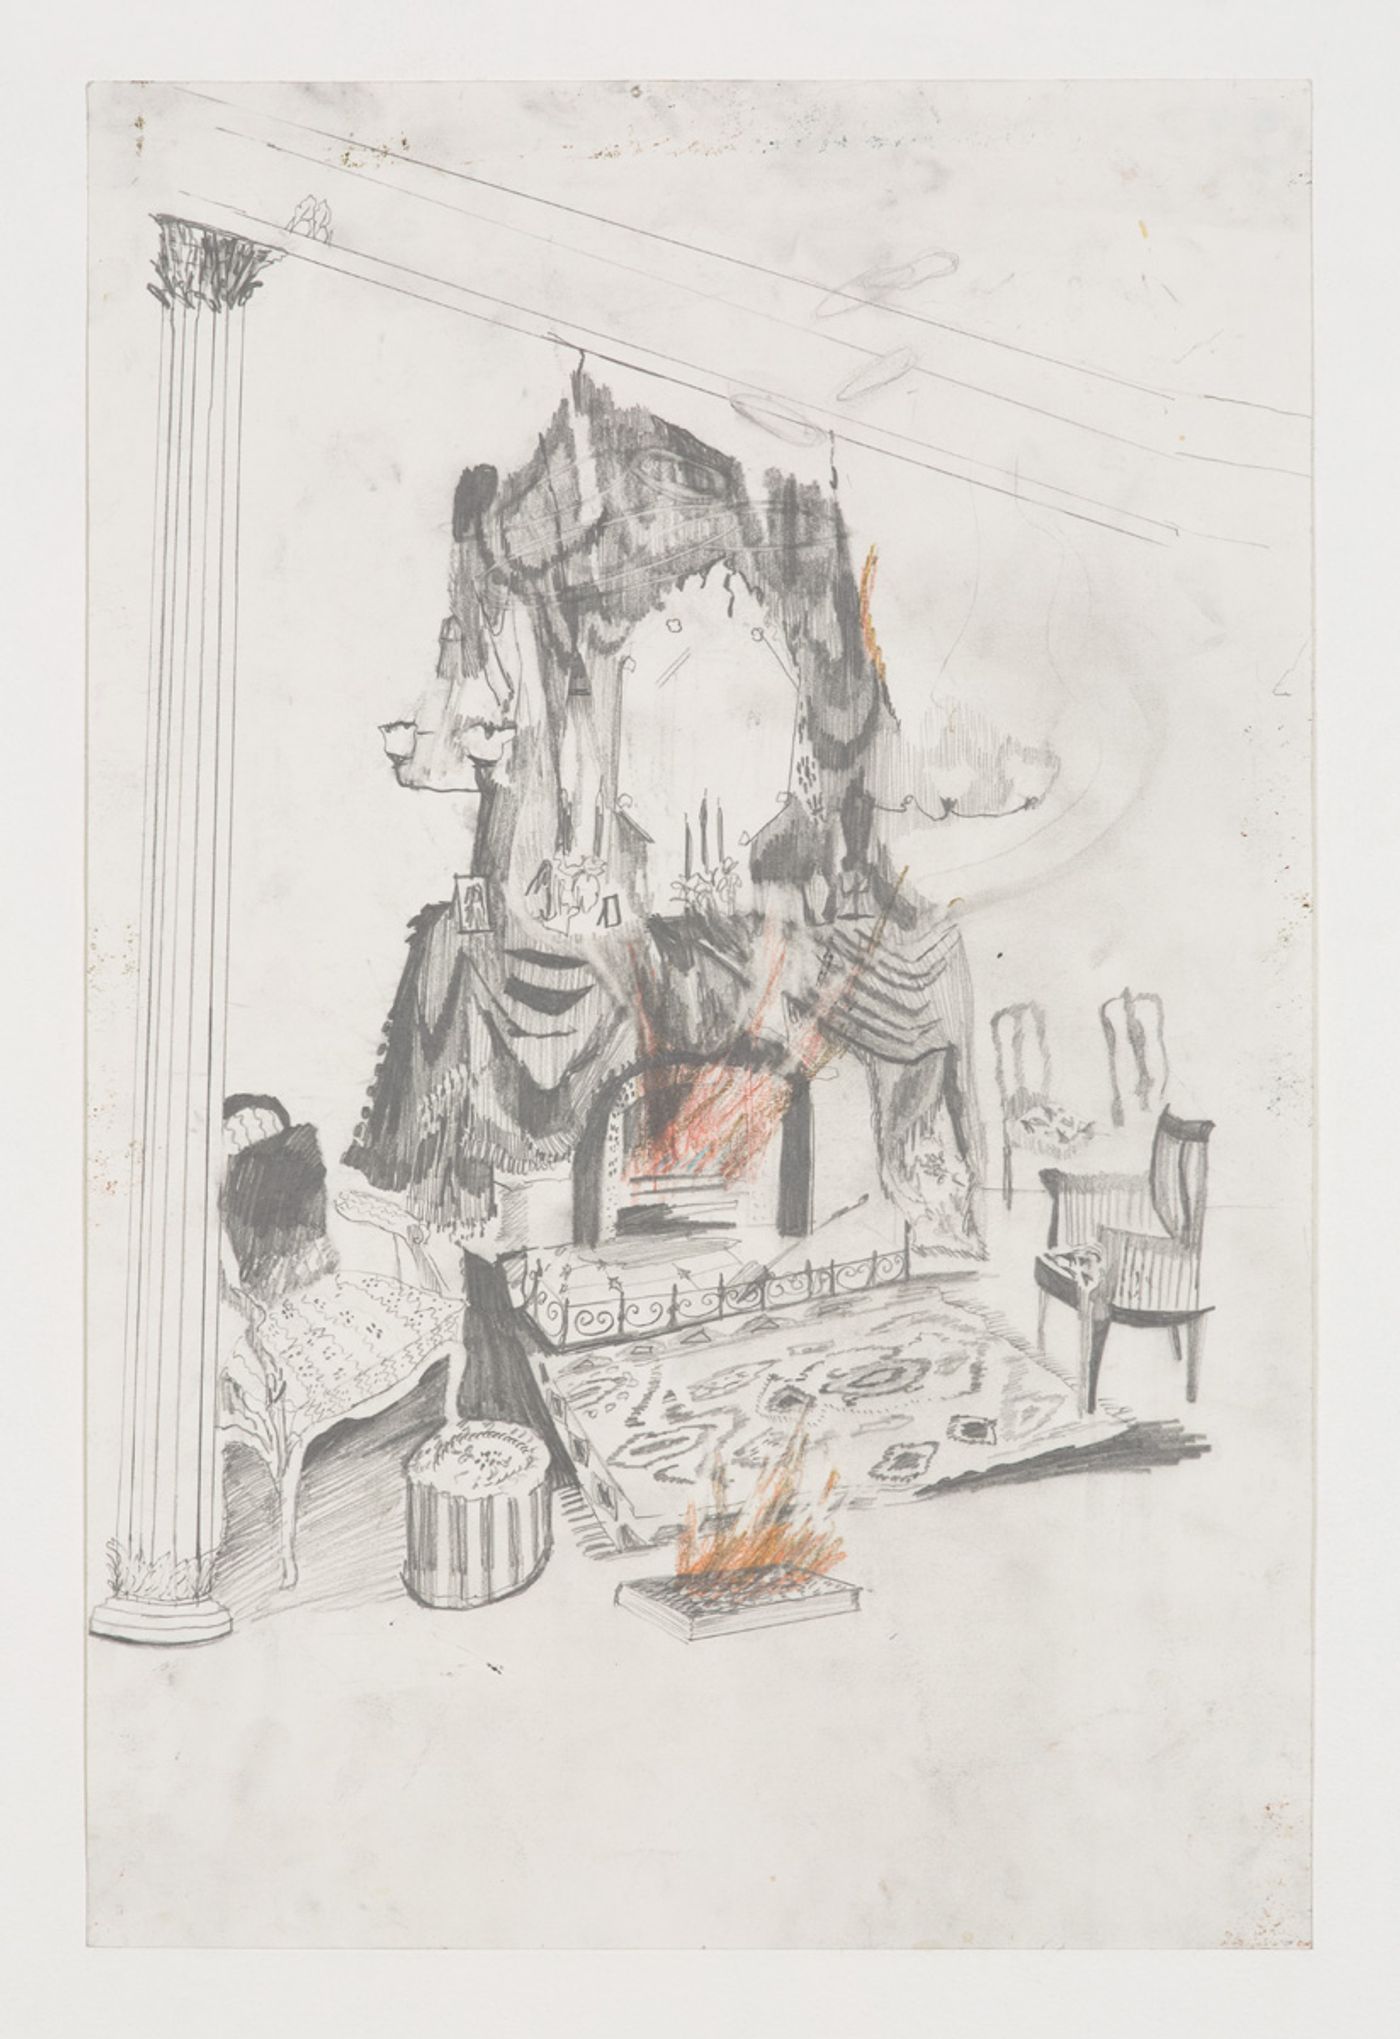 Image of Fireplace, 2016: Graphite on paper